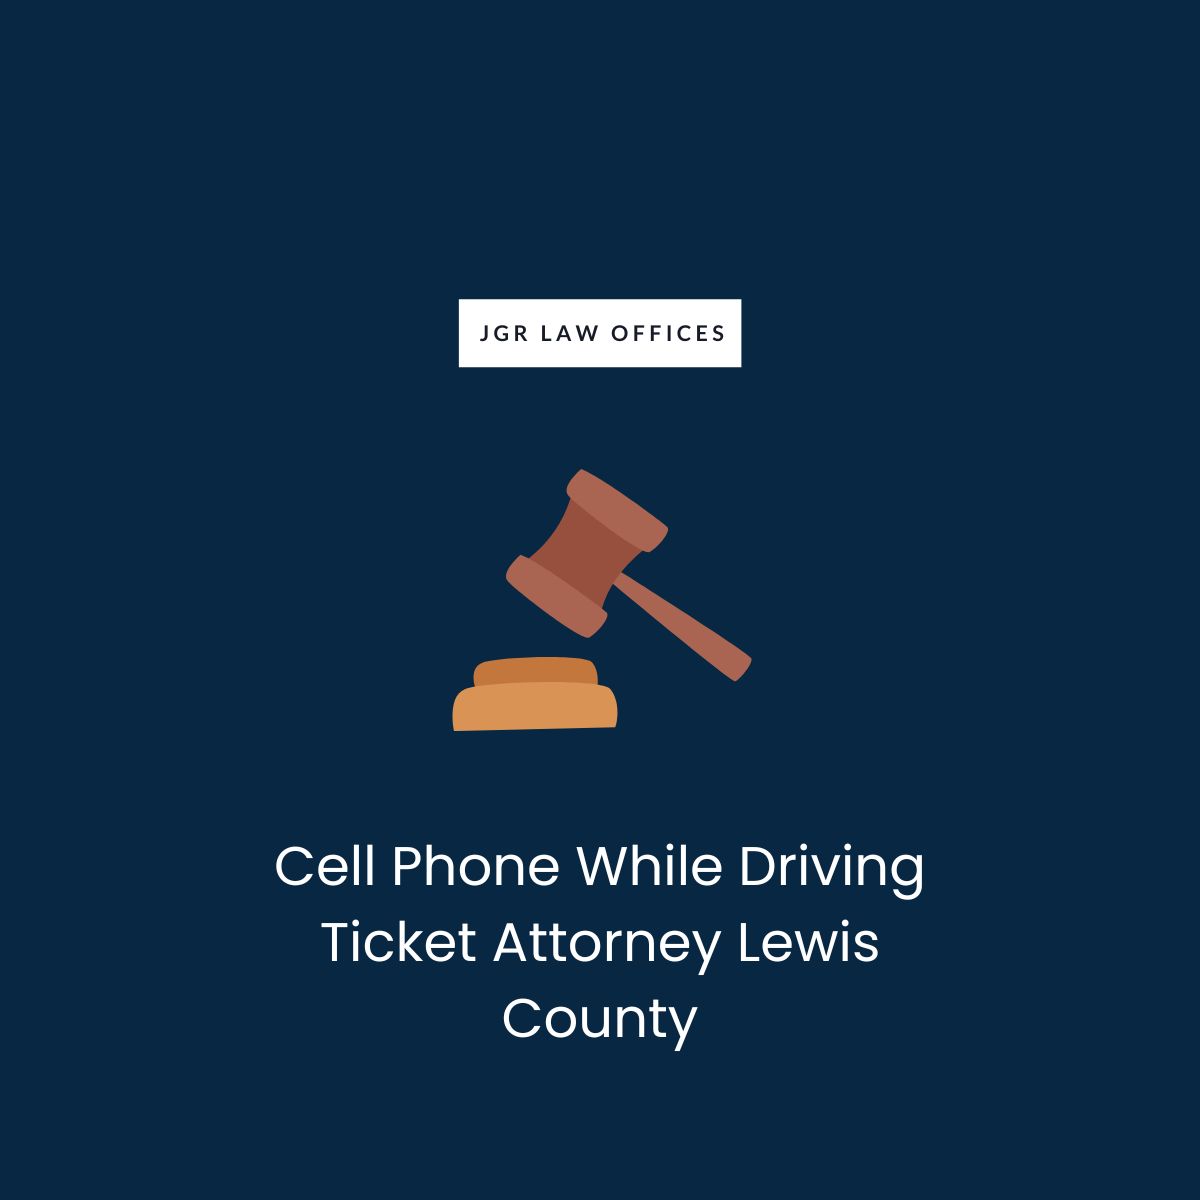 Cell Phone While Driving Ticket Attorney Lewis County